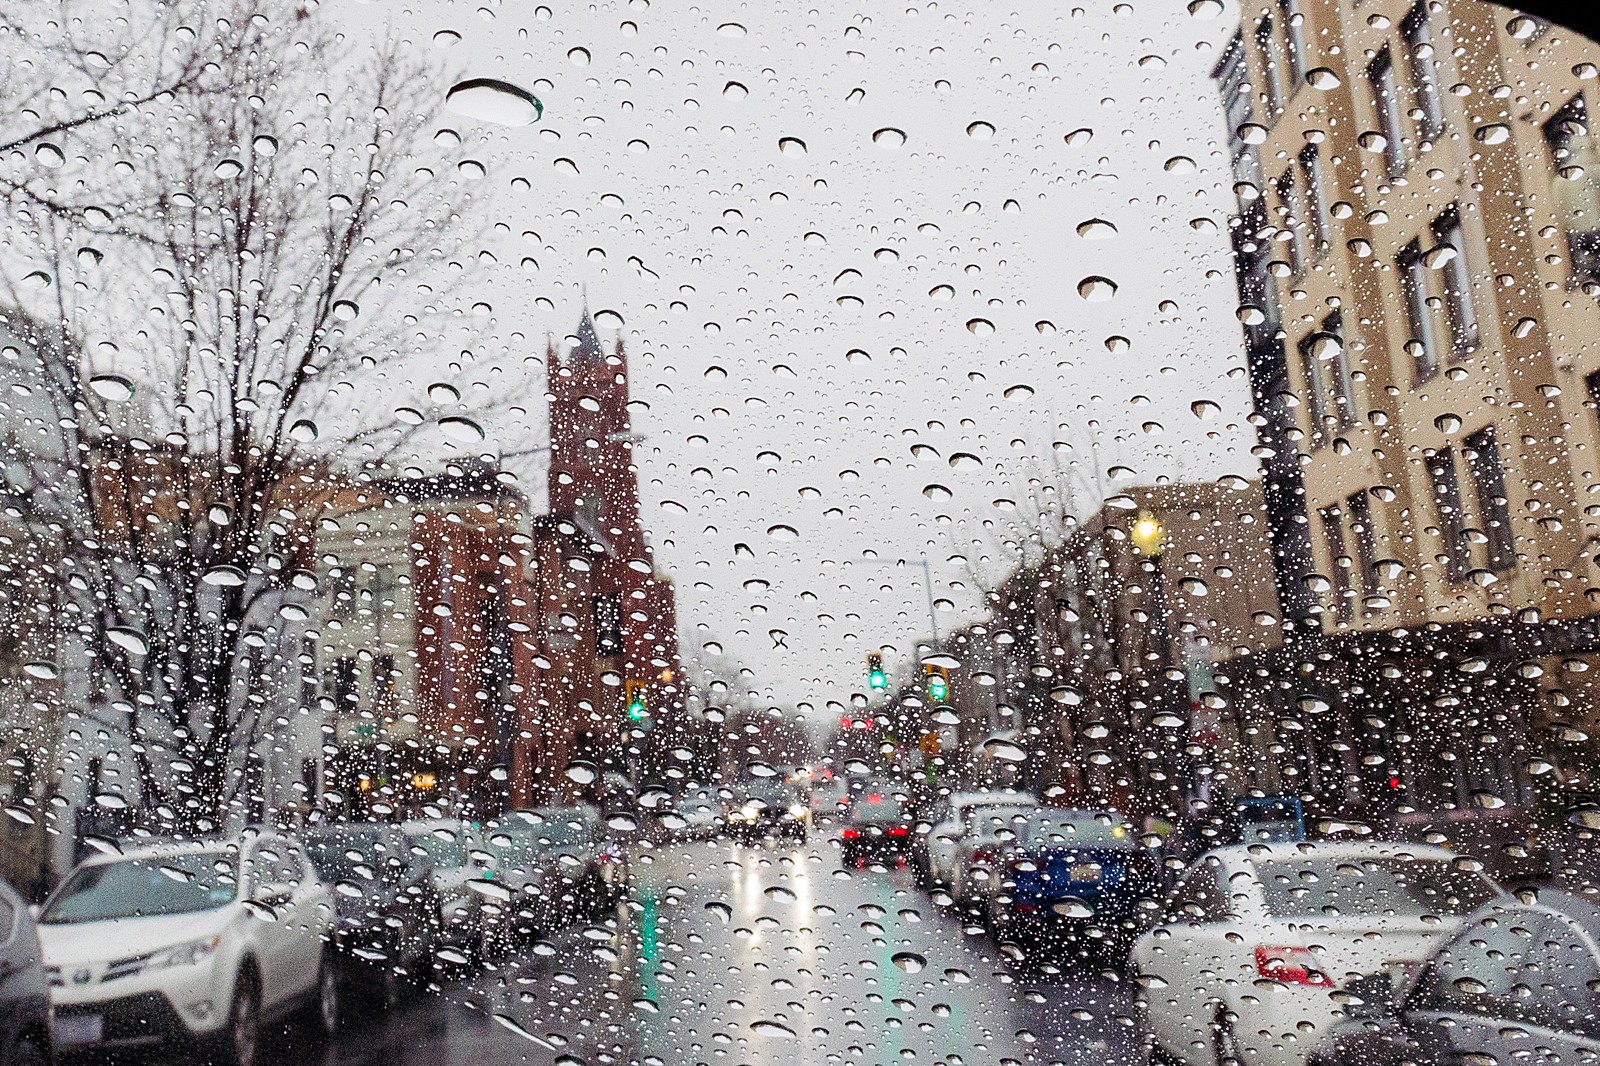 The church of the Immaculate Conception in DC is visible through raindrops on the windshield.